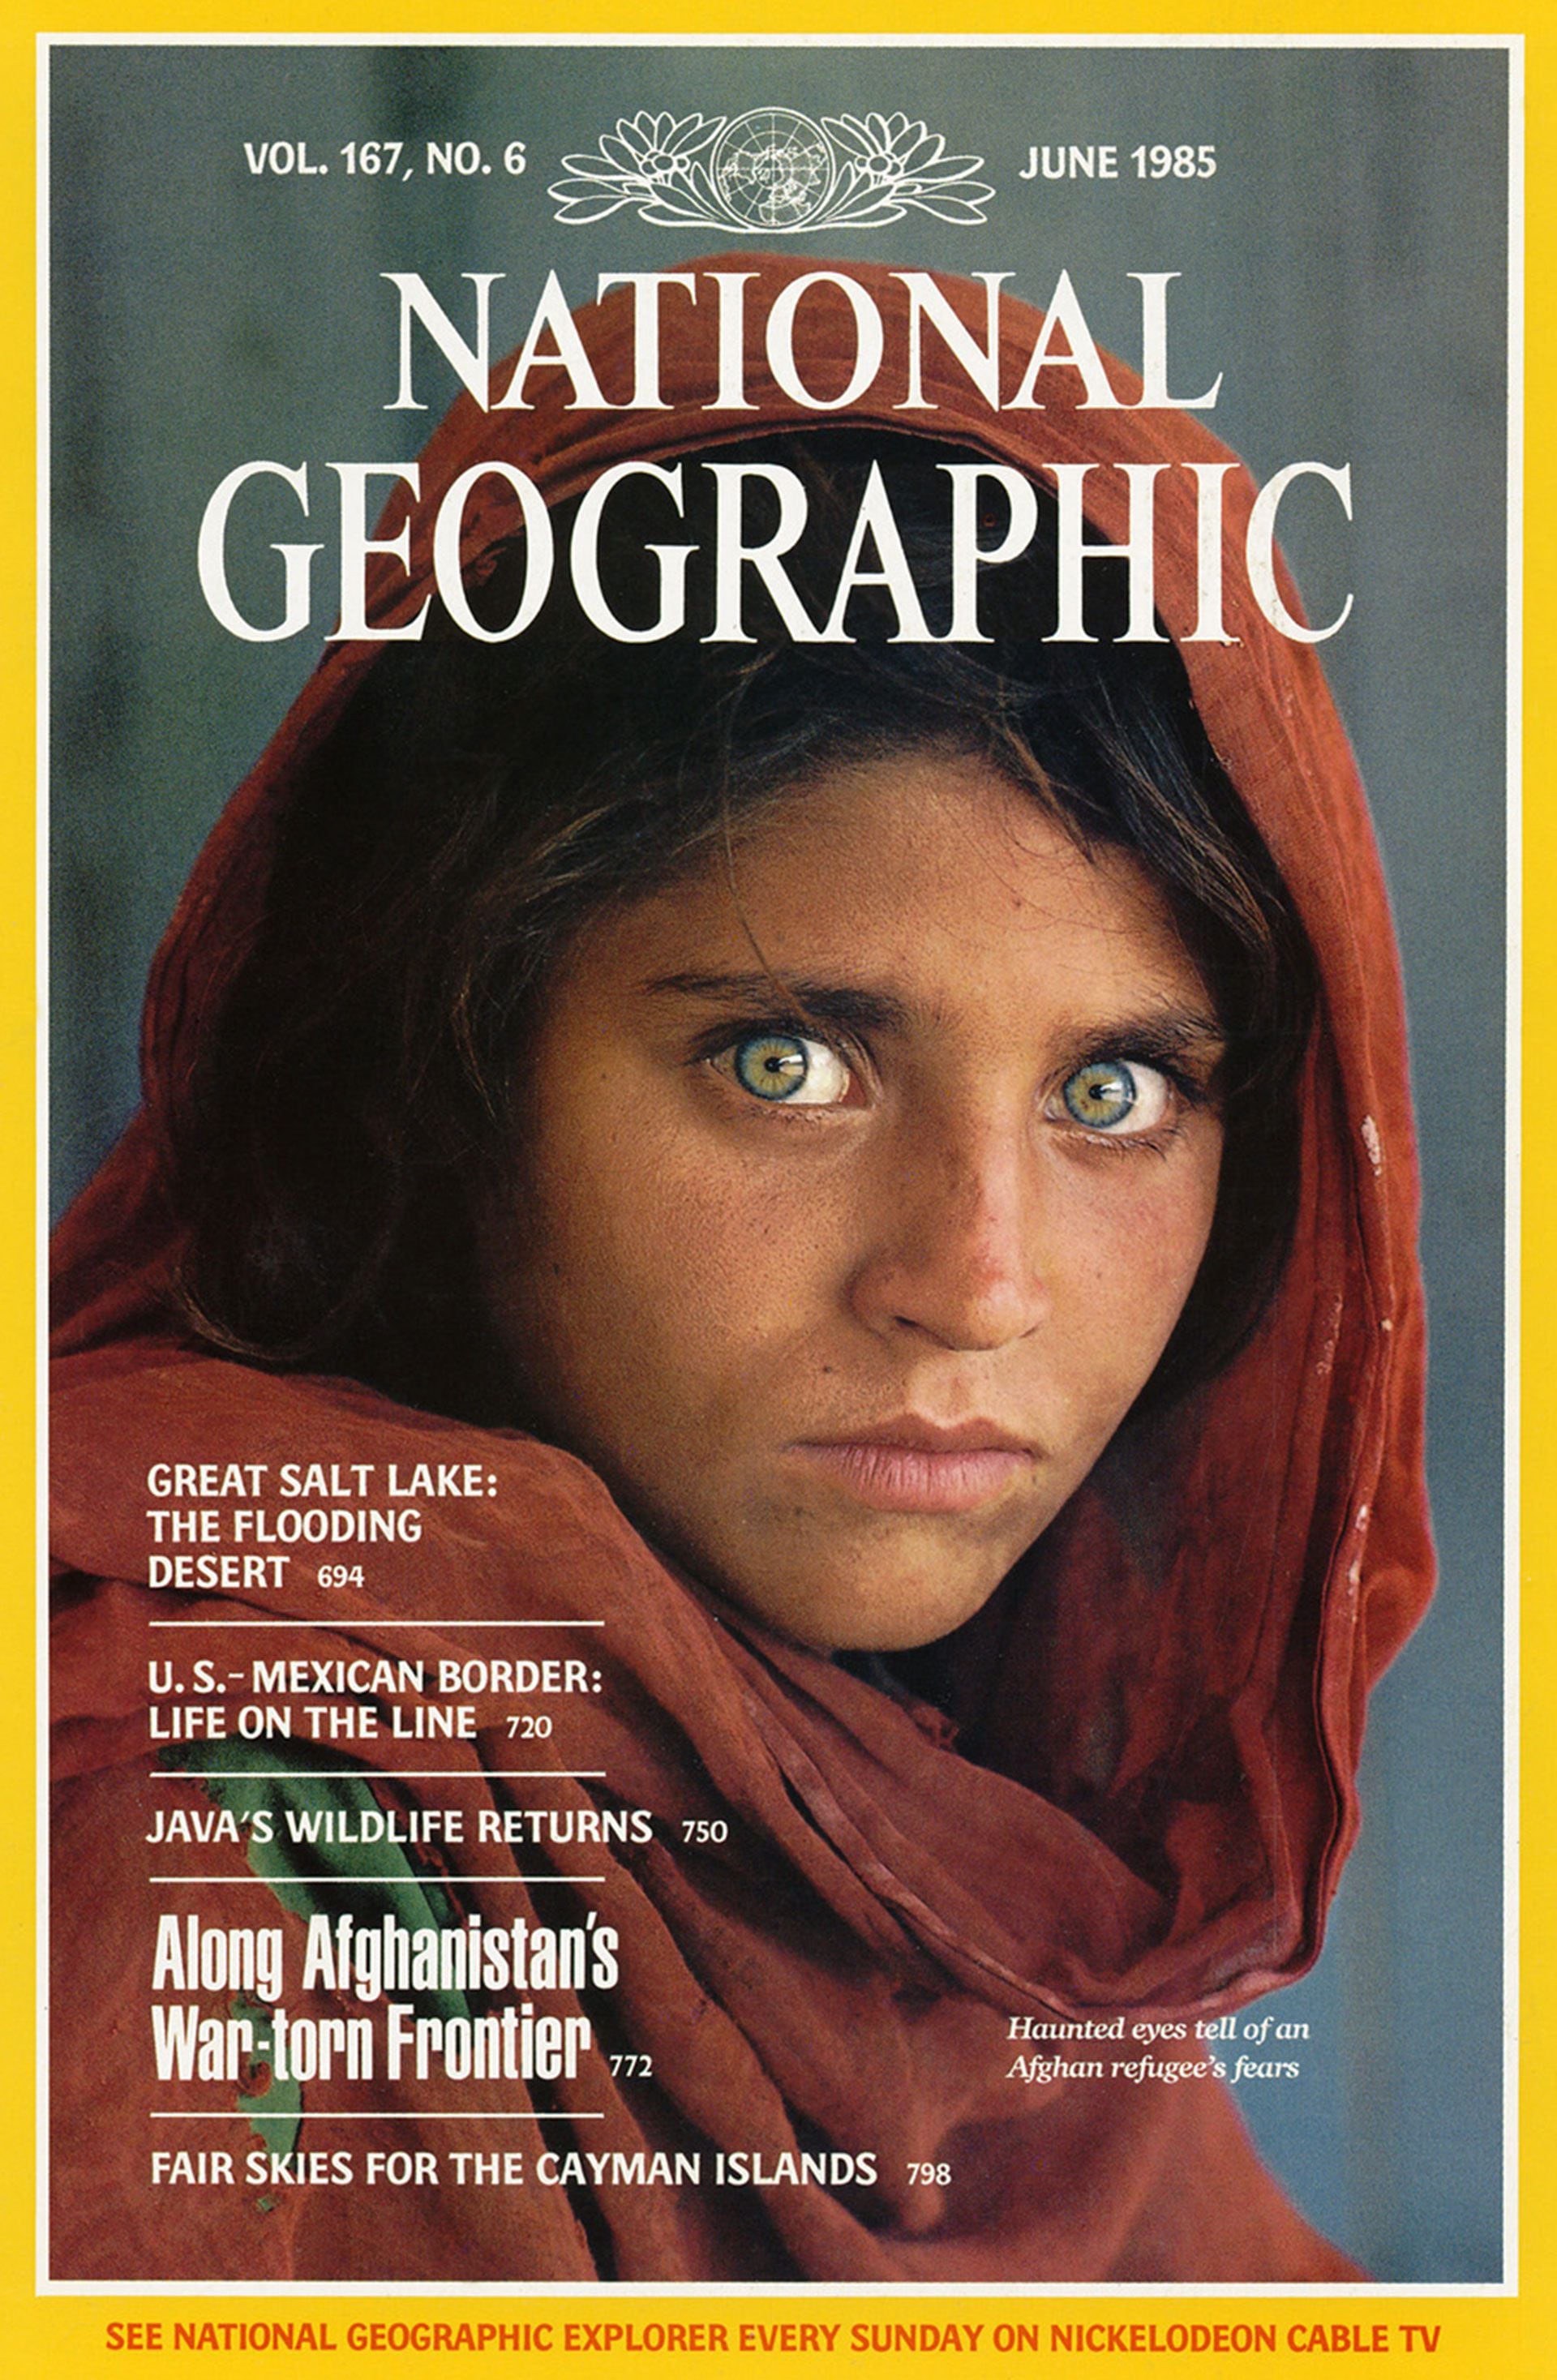 Green Eyed Afghan Girl From National Geographic Evacuated To Italy American Chronicles 3069